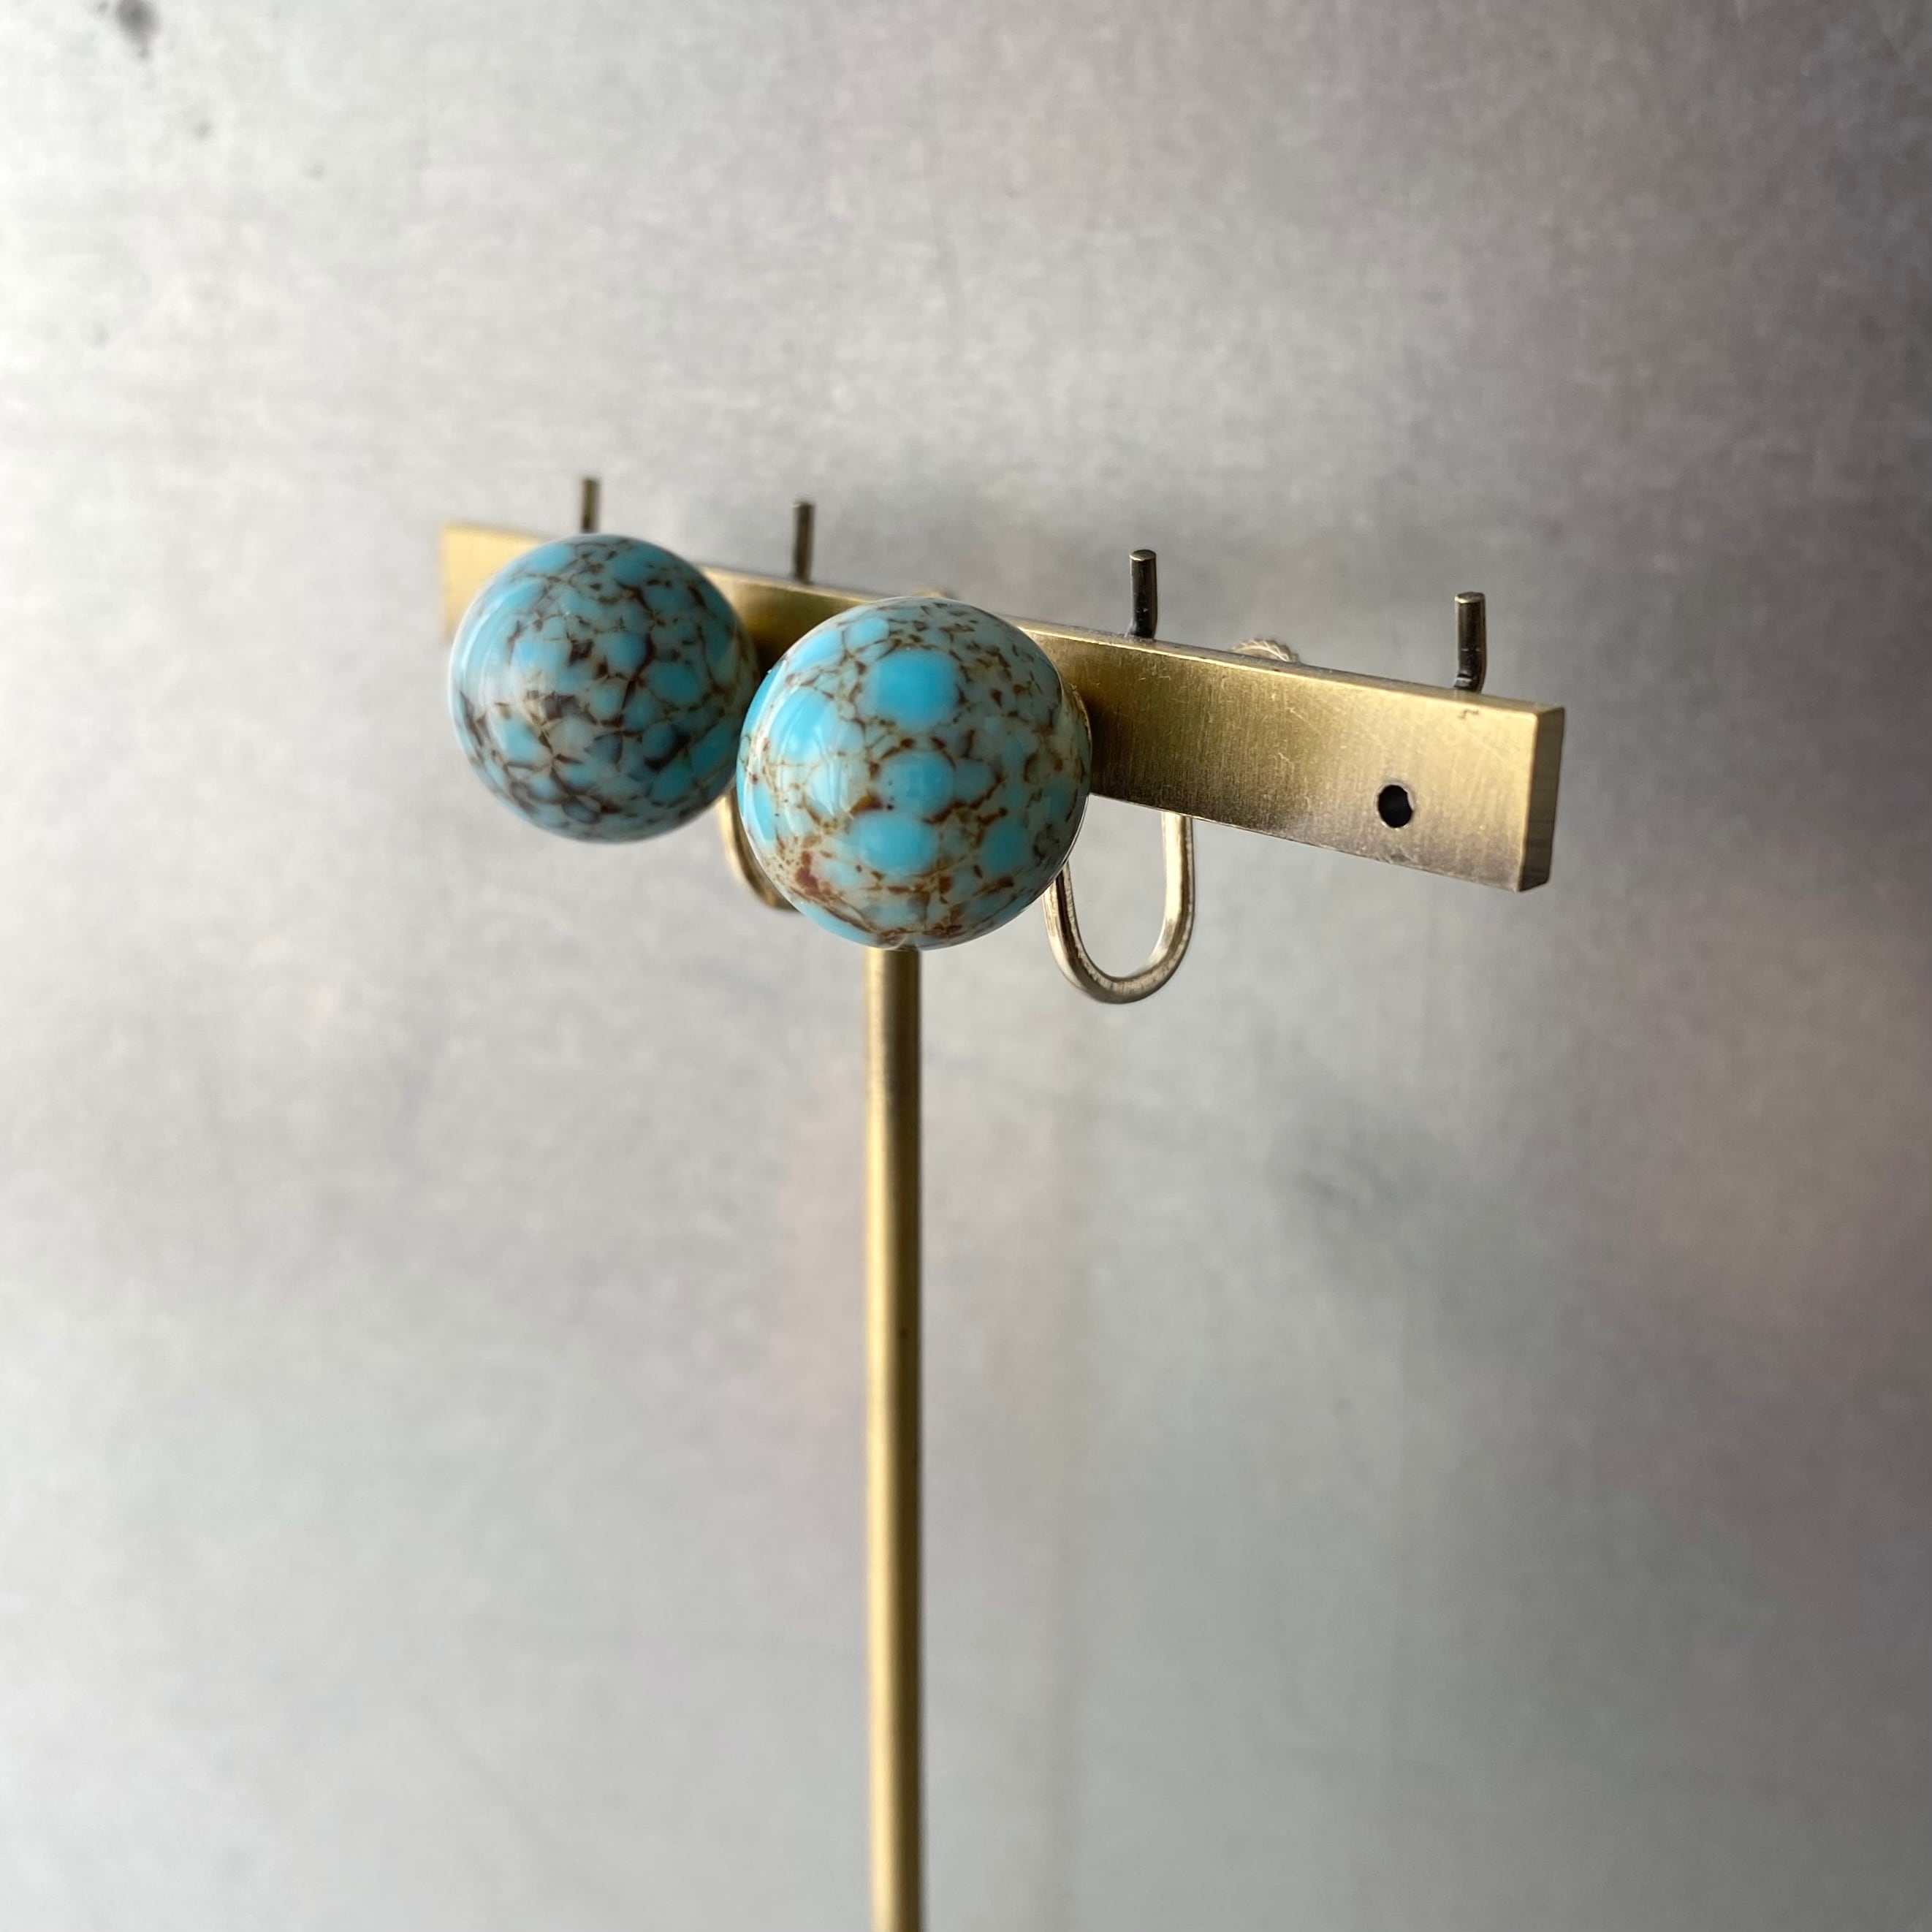 Vintage 60's~70's USA earth glass earring ヴィンテージ 地球 ガラス イヤリング POOL VINTAGE